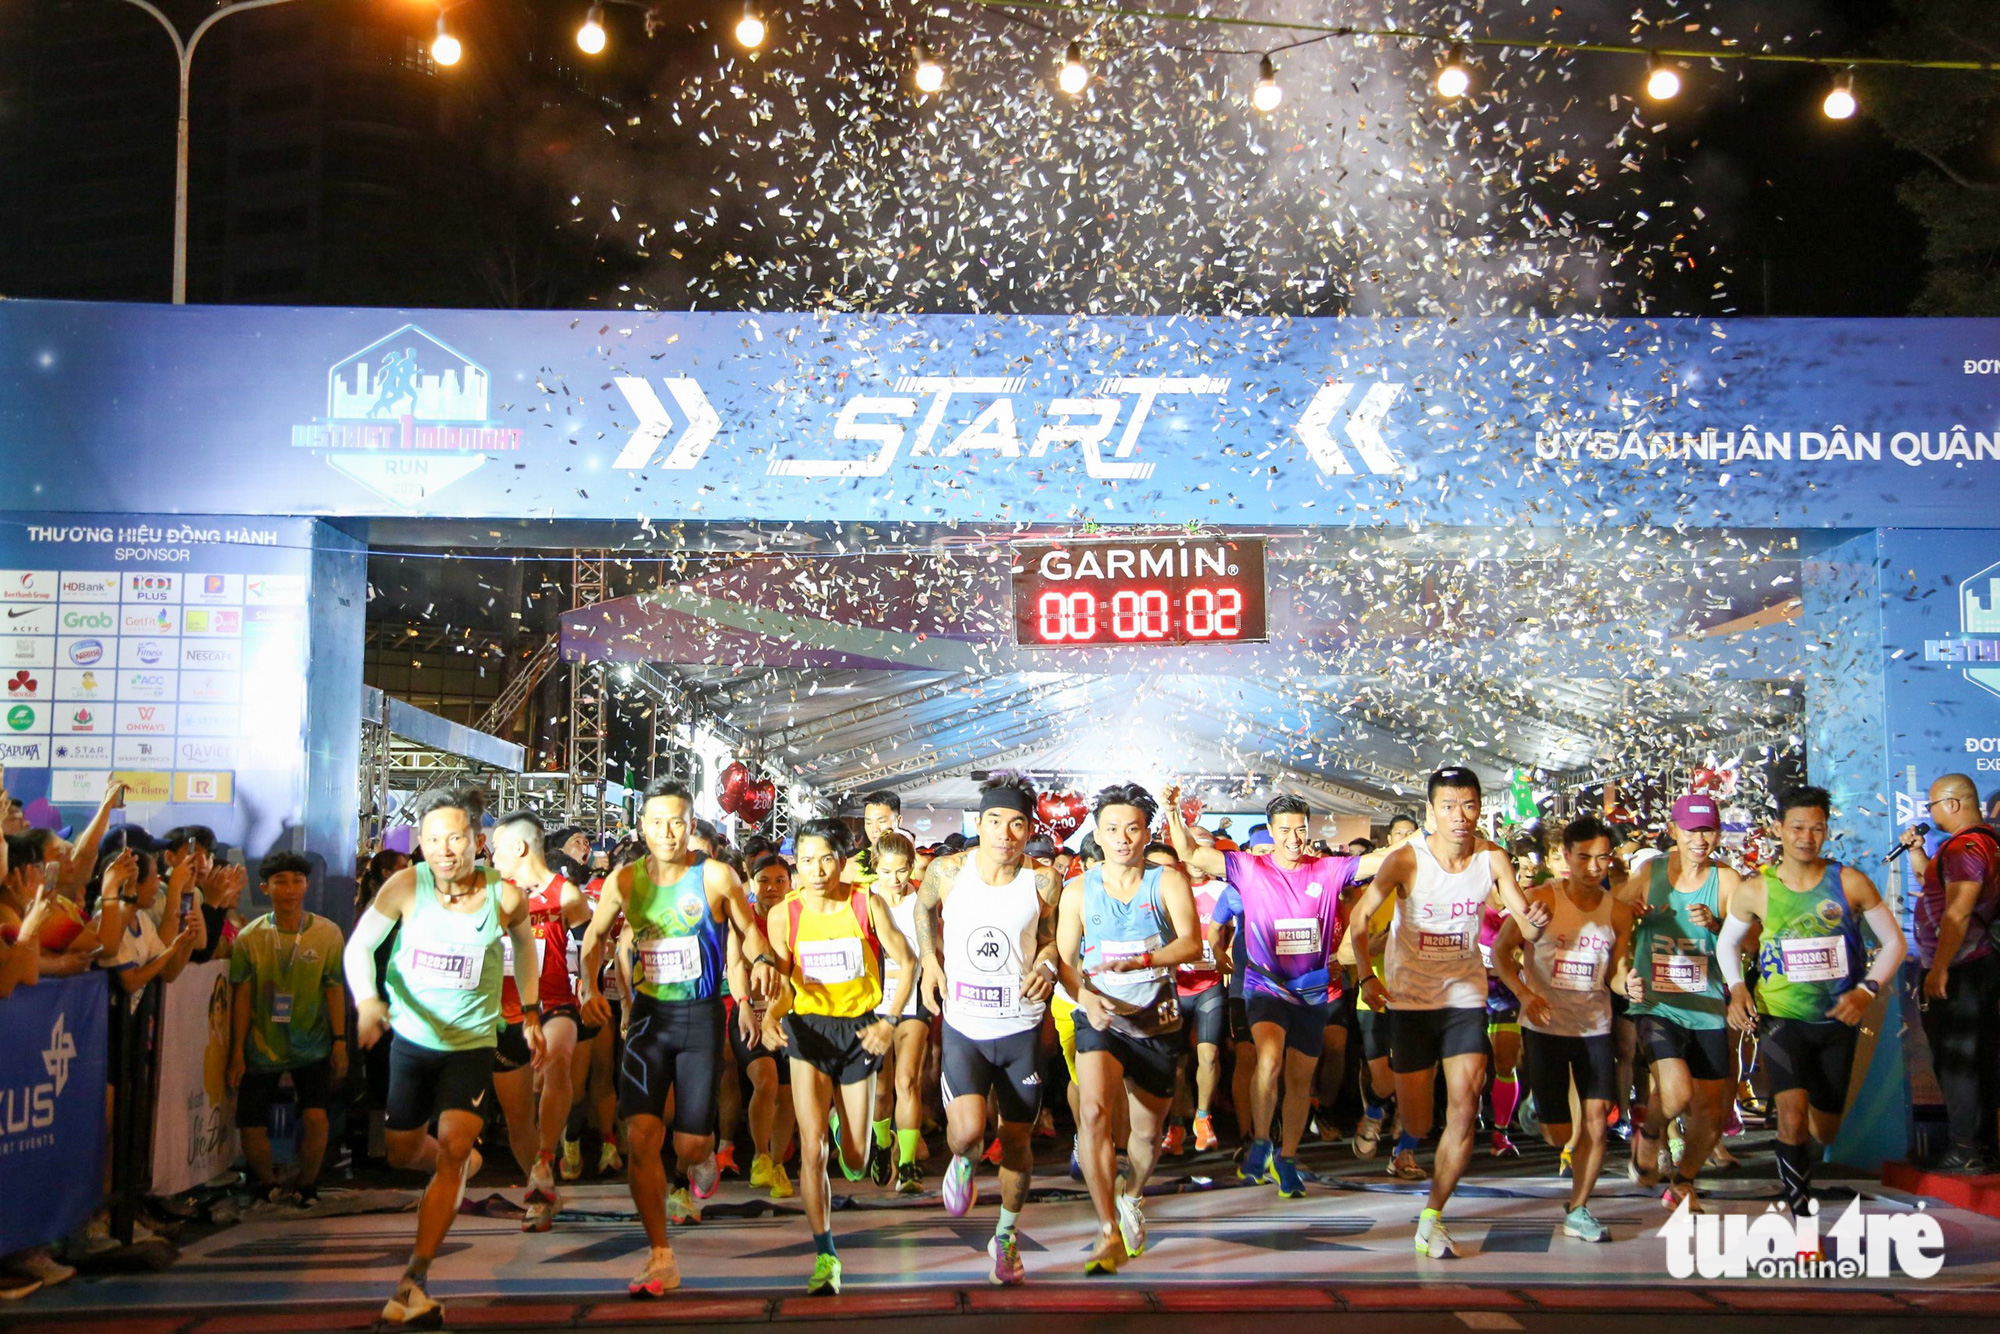 Over 4,000 take part in midnight run in downtown Ho Chi Minh City